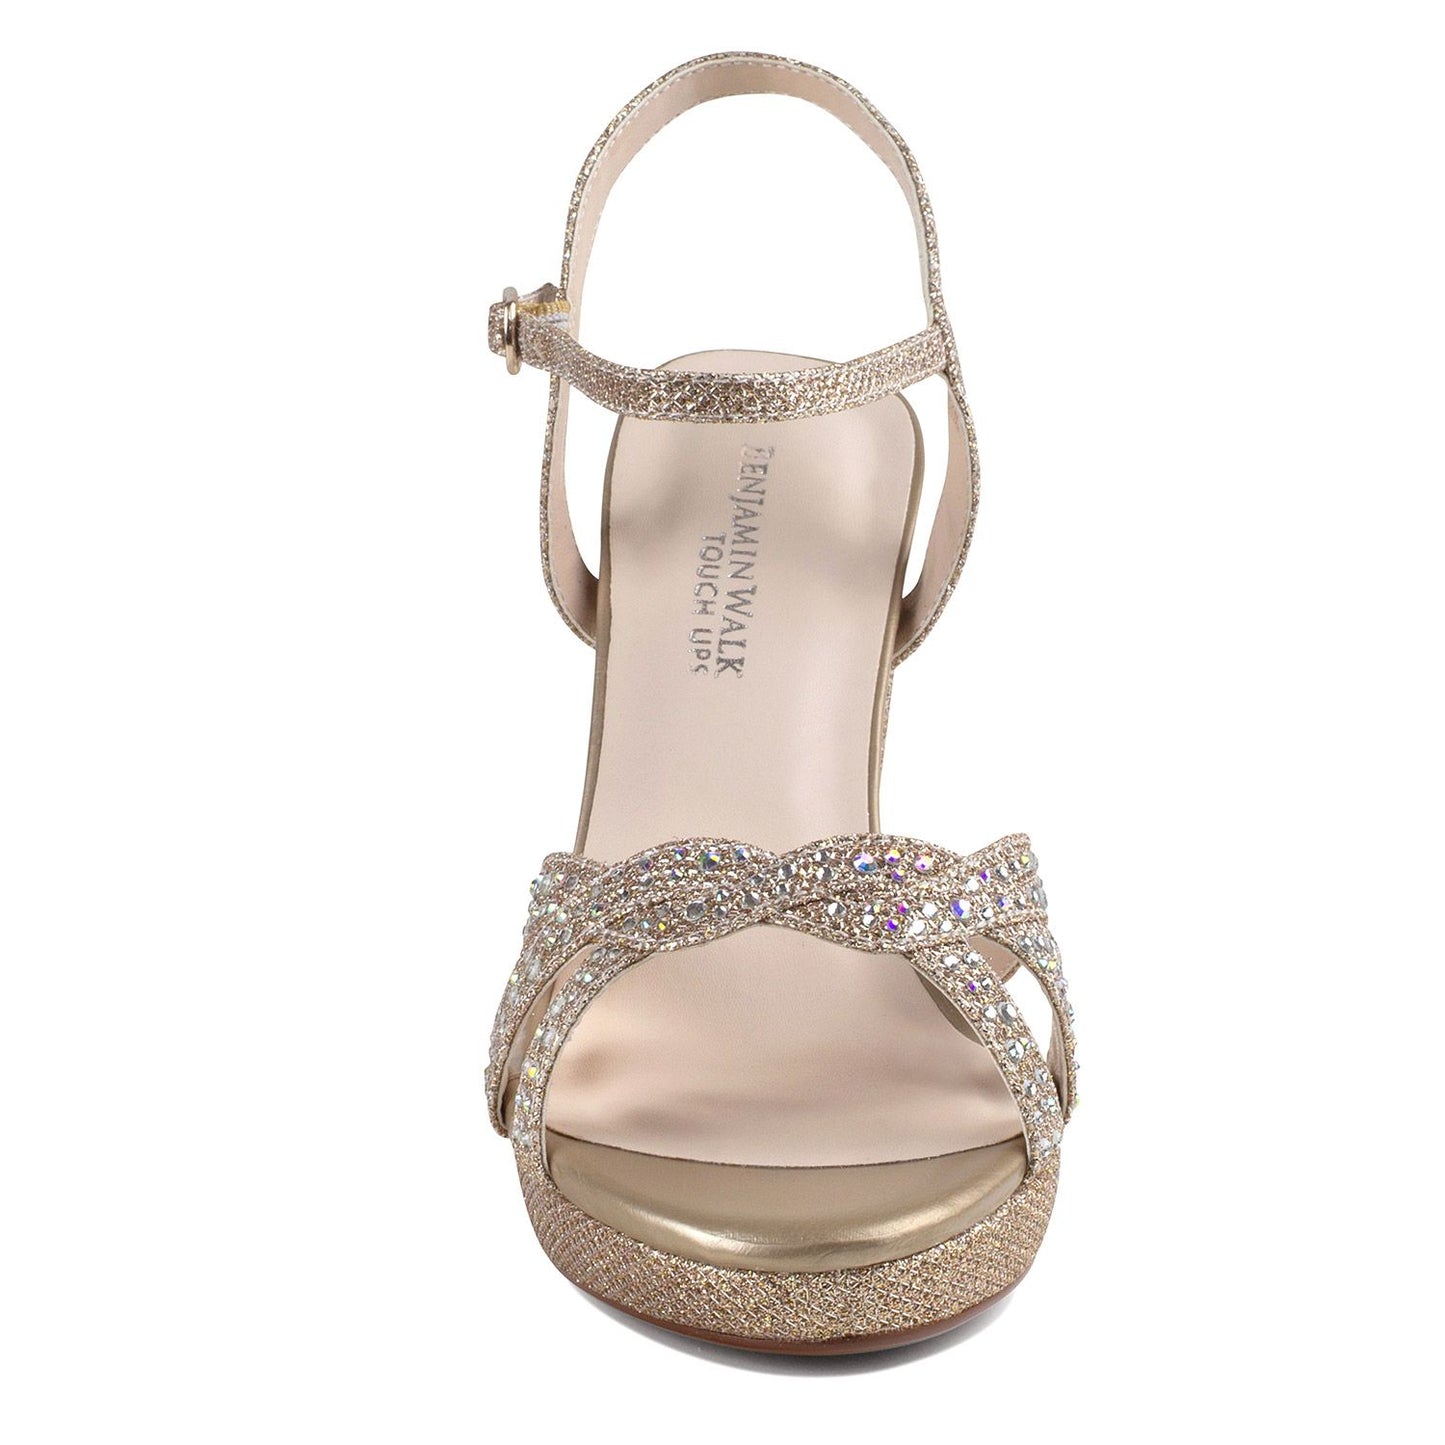 Front View of Champagne glitter platform shoe with 3.75 heel with open toe.